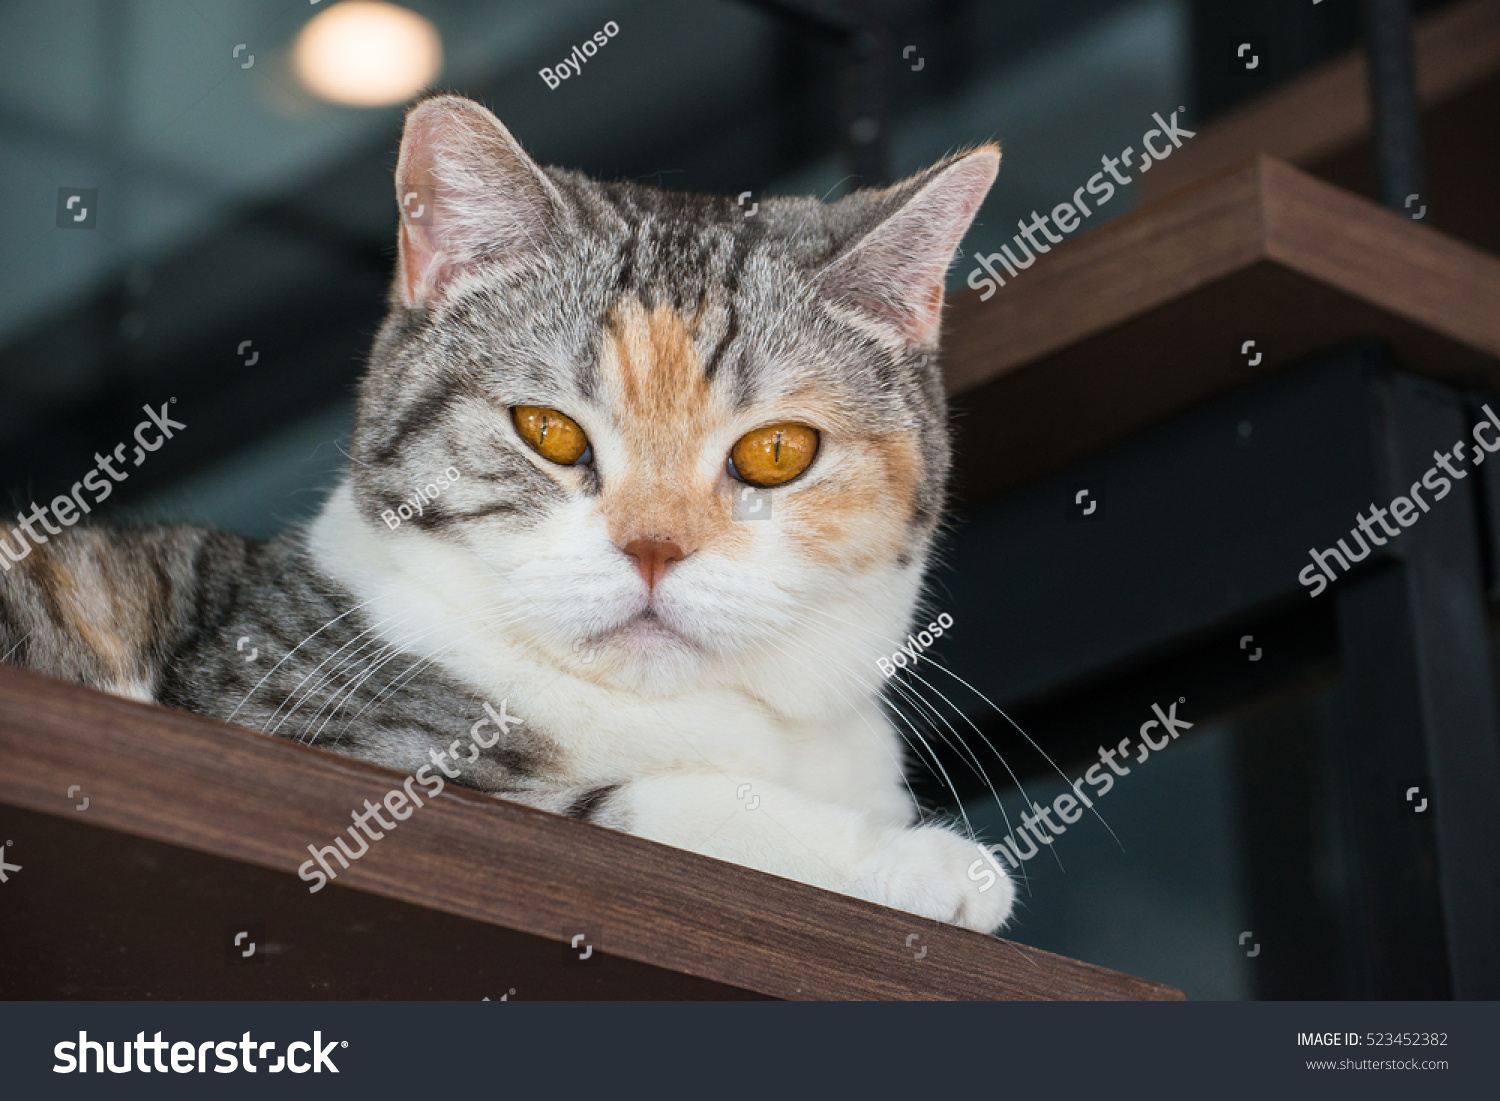 The American wirehair cat looking to camera. The American wirehair cat is a breed native to New York, with a wiry, crimped coat resulting from a natural genetic mutation. #523452382